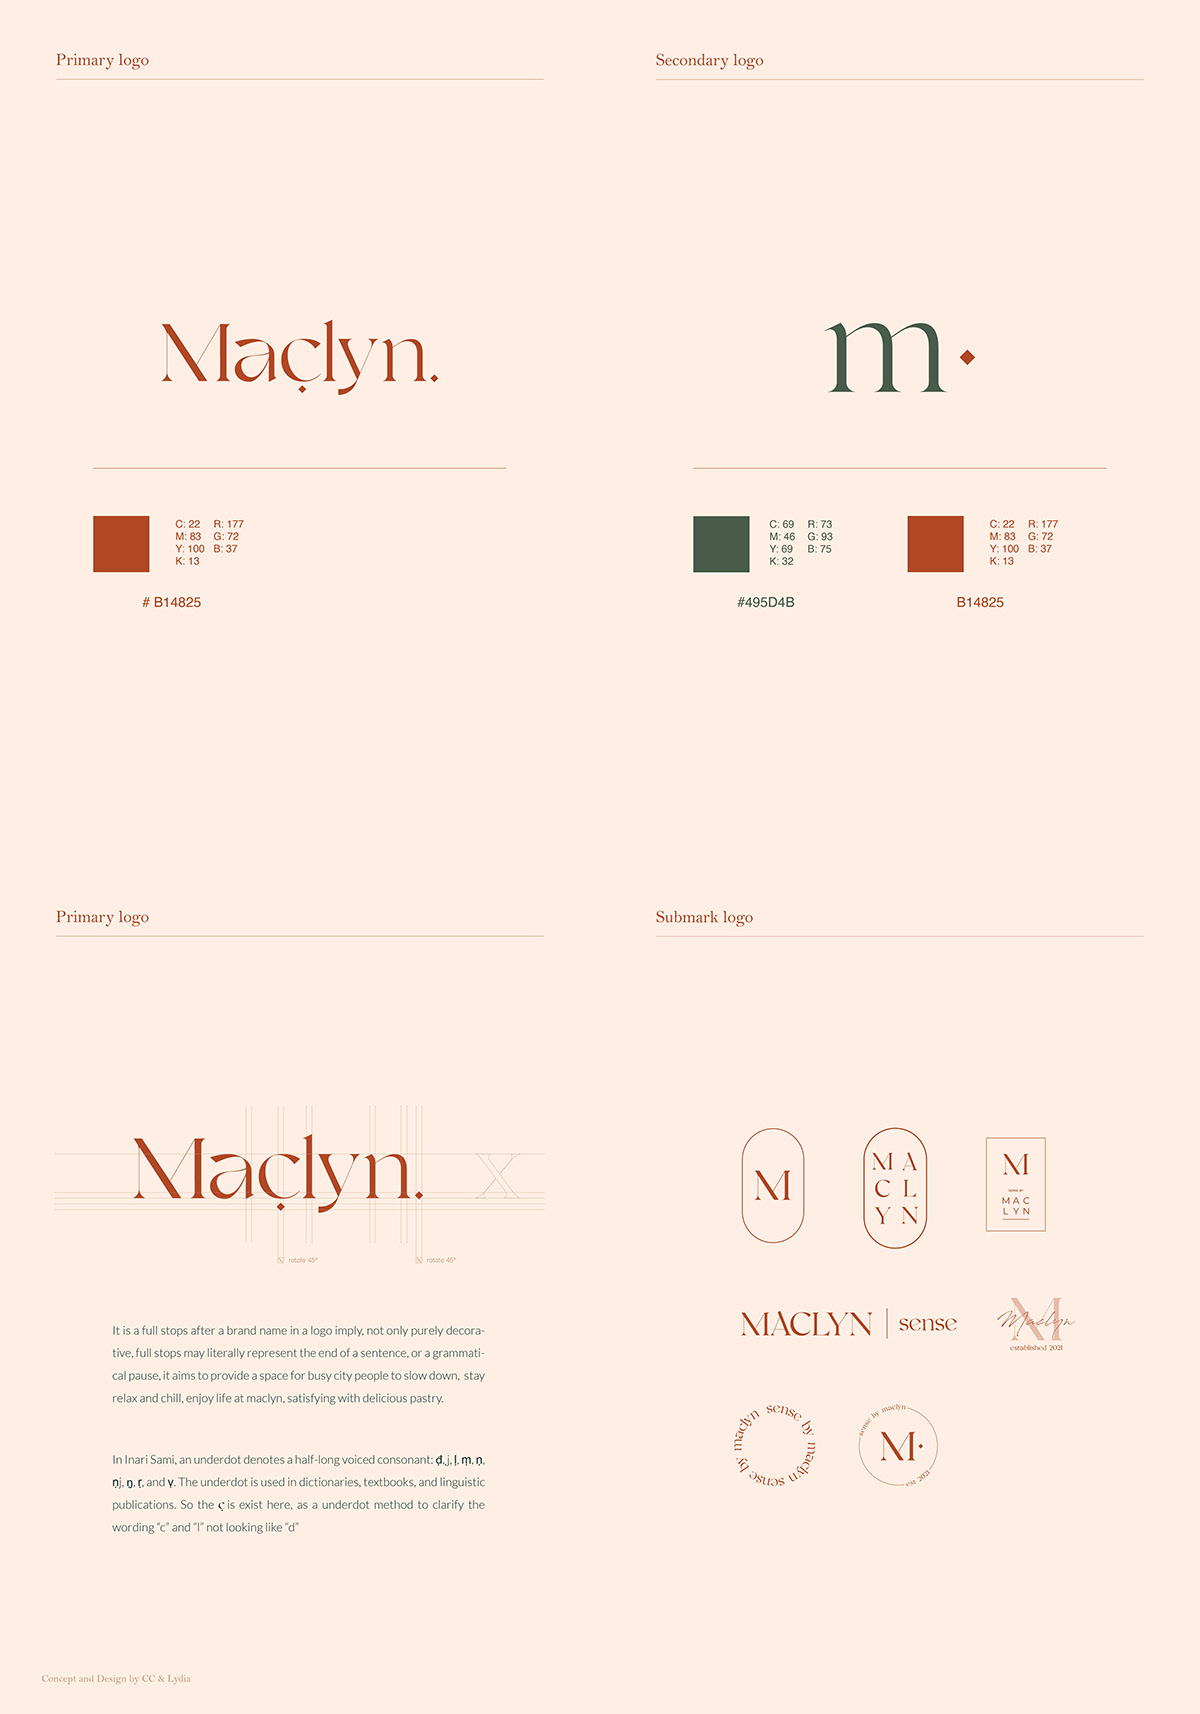 Maclyn Pastry on Behance